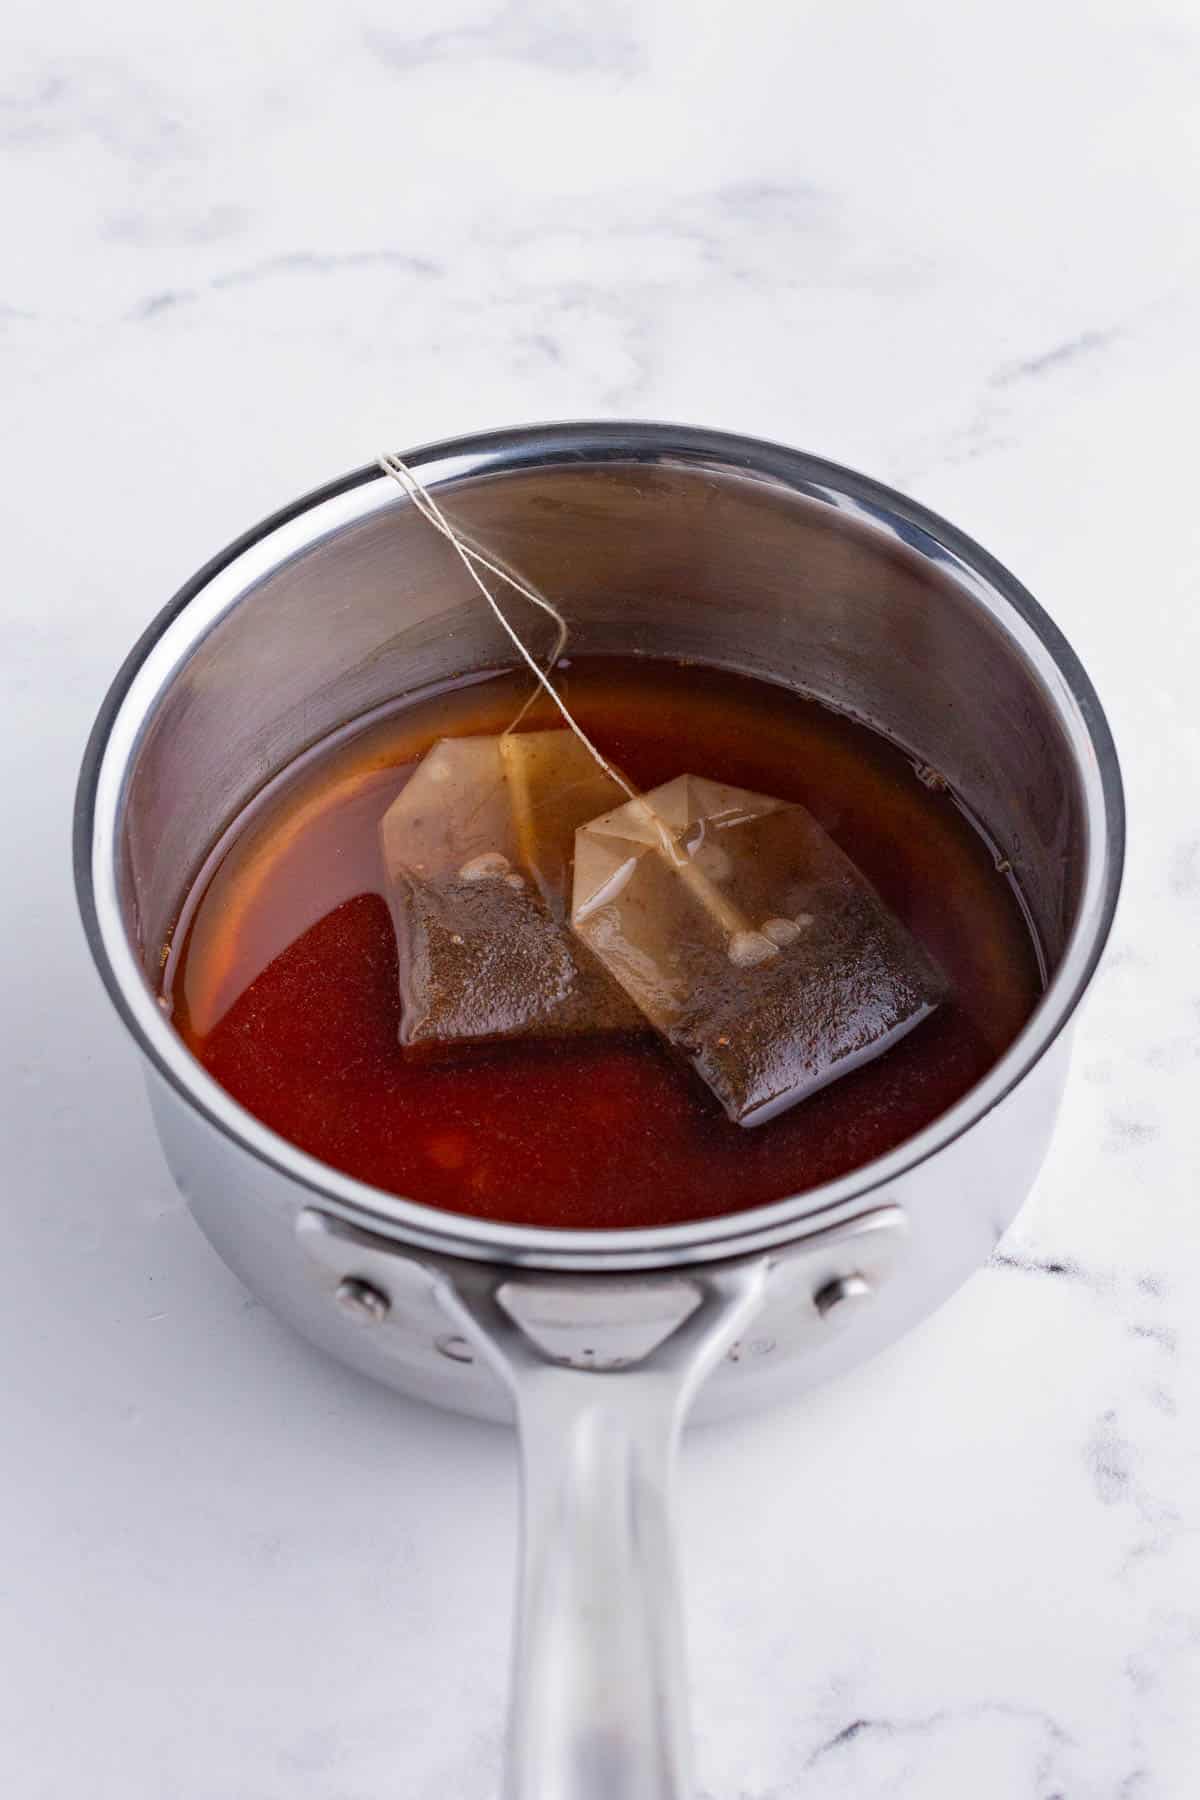 Black tea bags are added to water with sweetener and spices and heated on the stove.